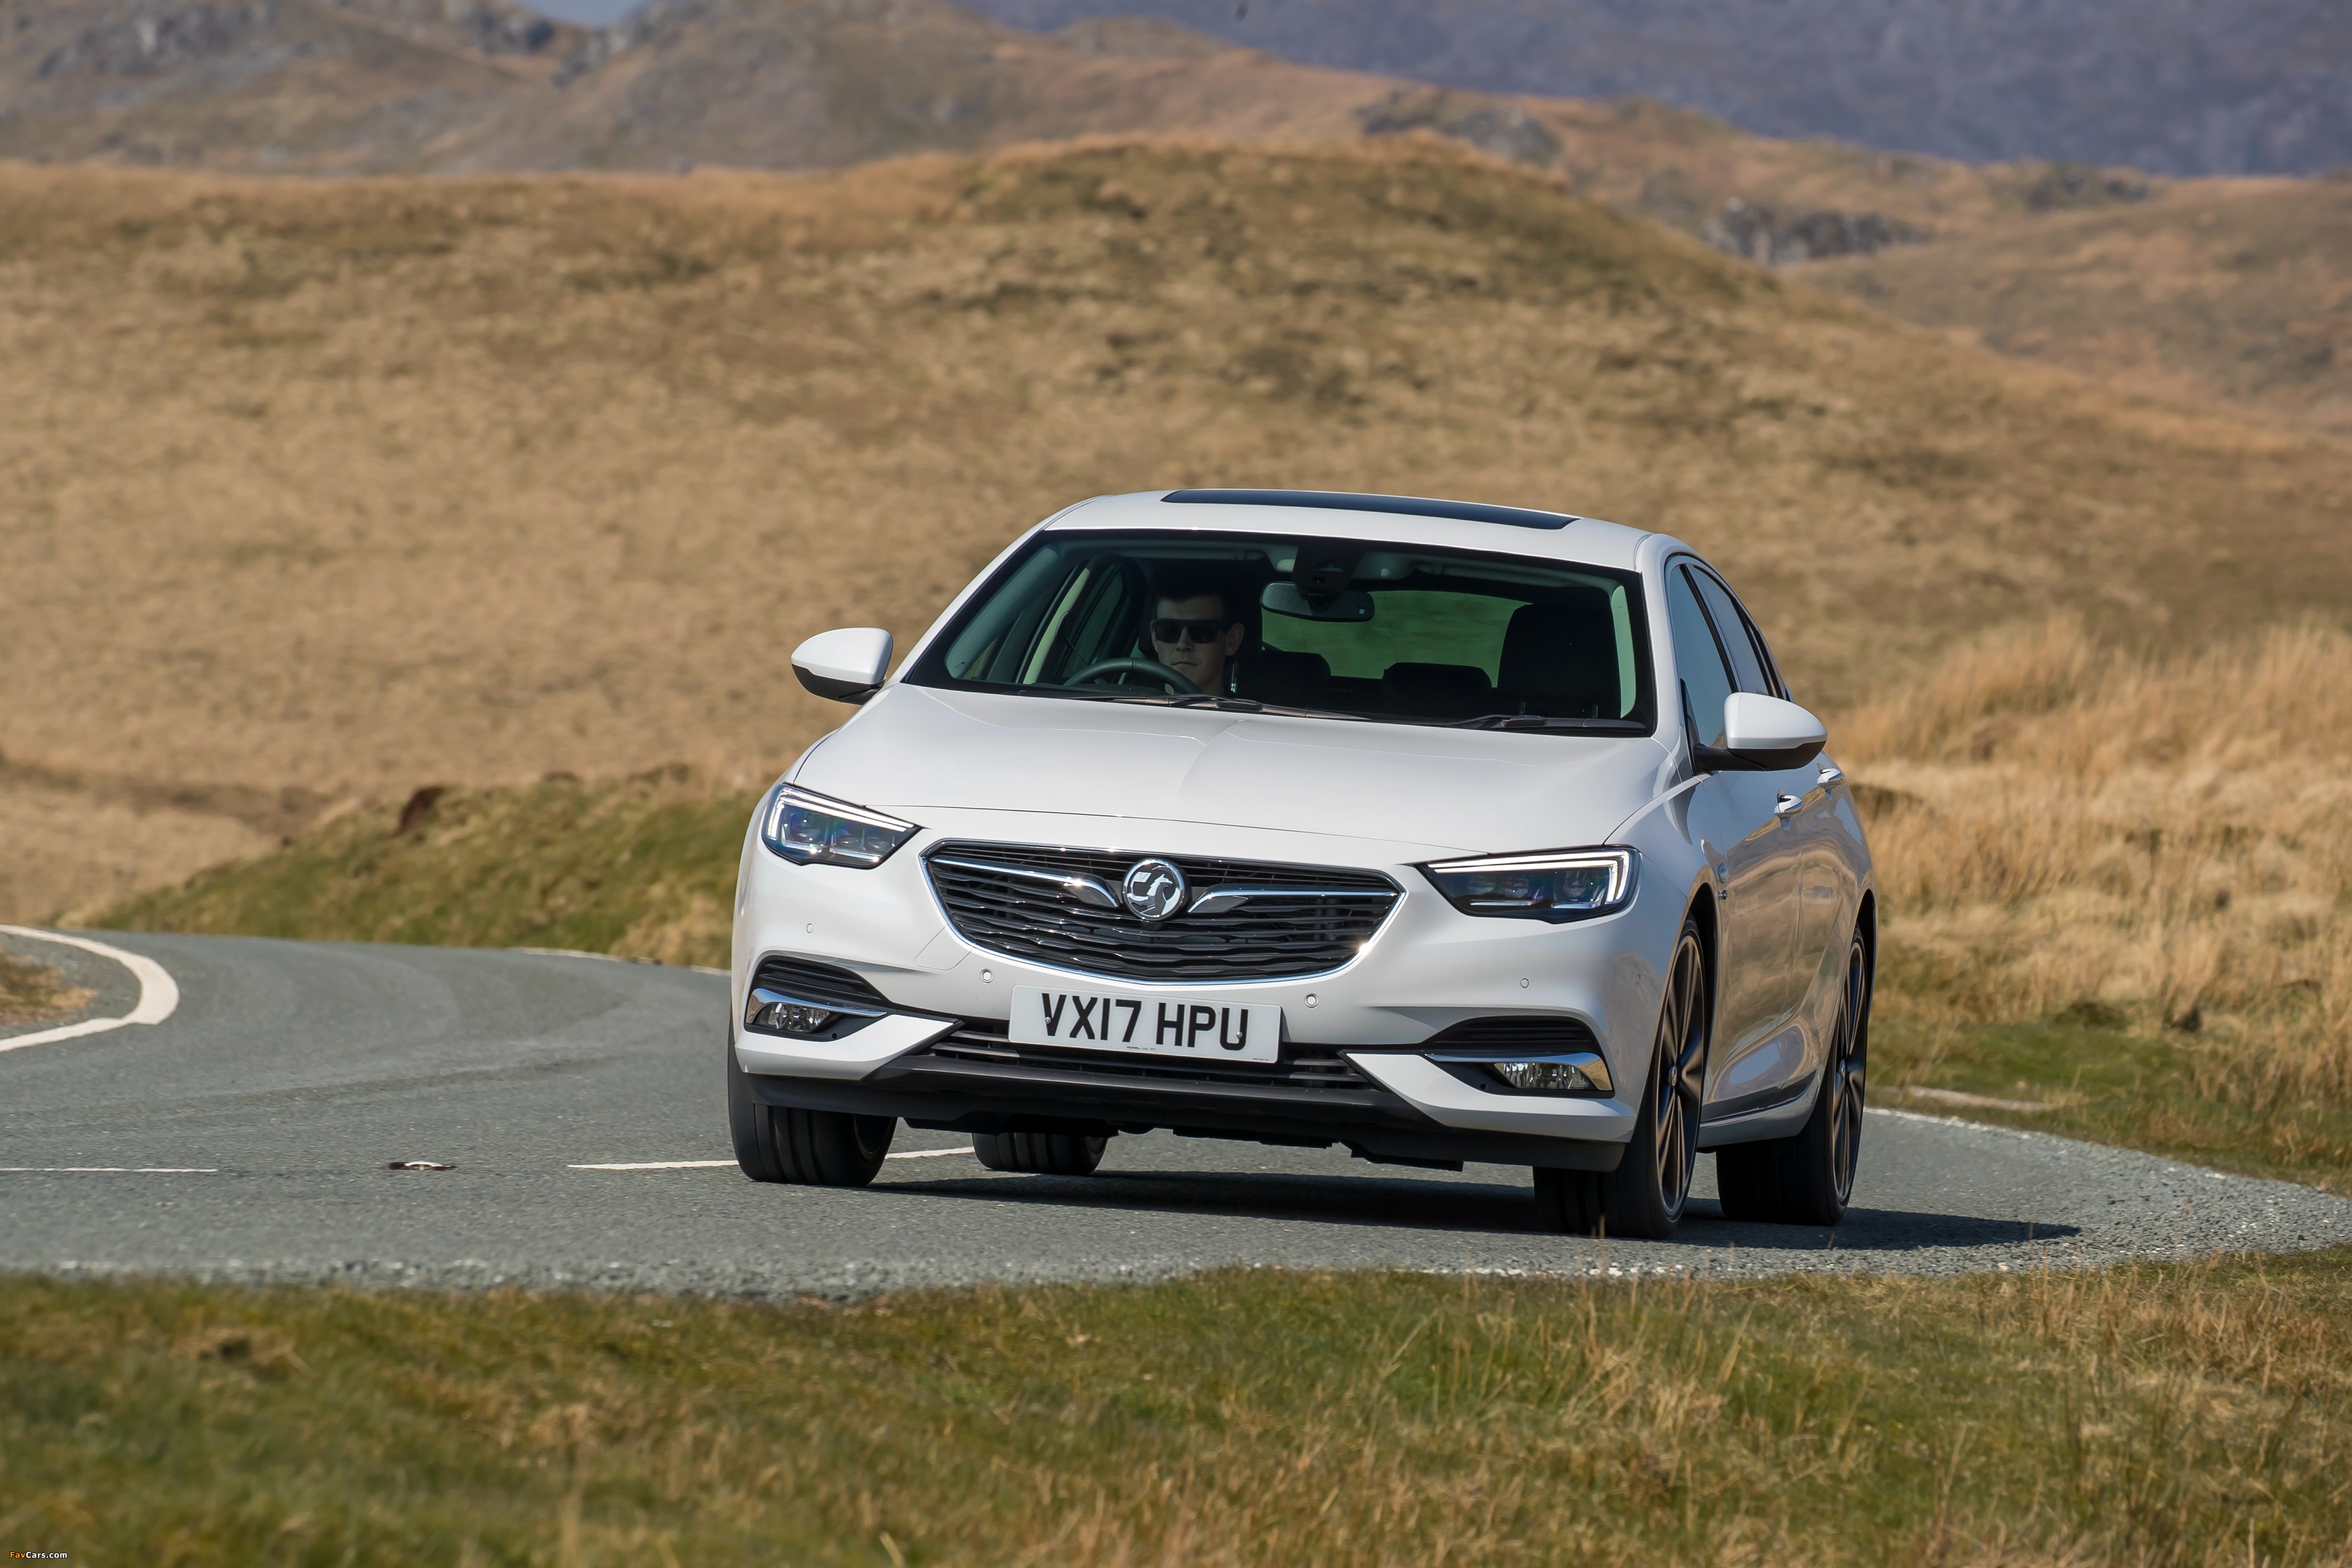 Vauxhall Insignia Grand Sport Turbo 4×4 2017 images (4096 x 2731)